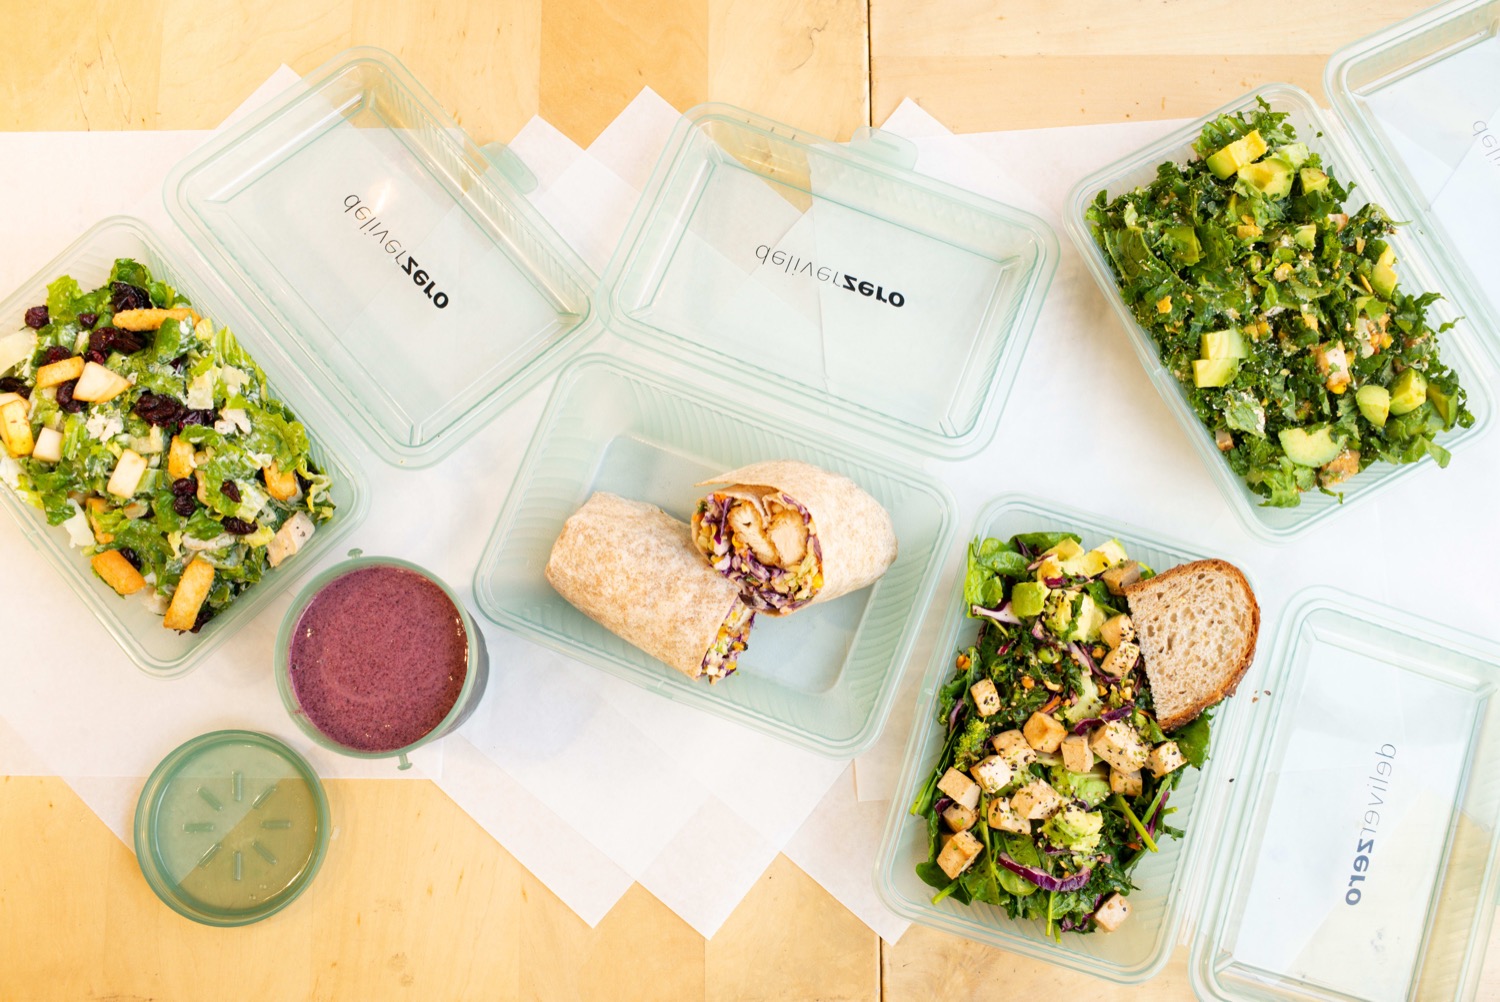 This New Reusable Packaging Concept Wants to Help Reduce Restaurant Takeout Waste